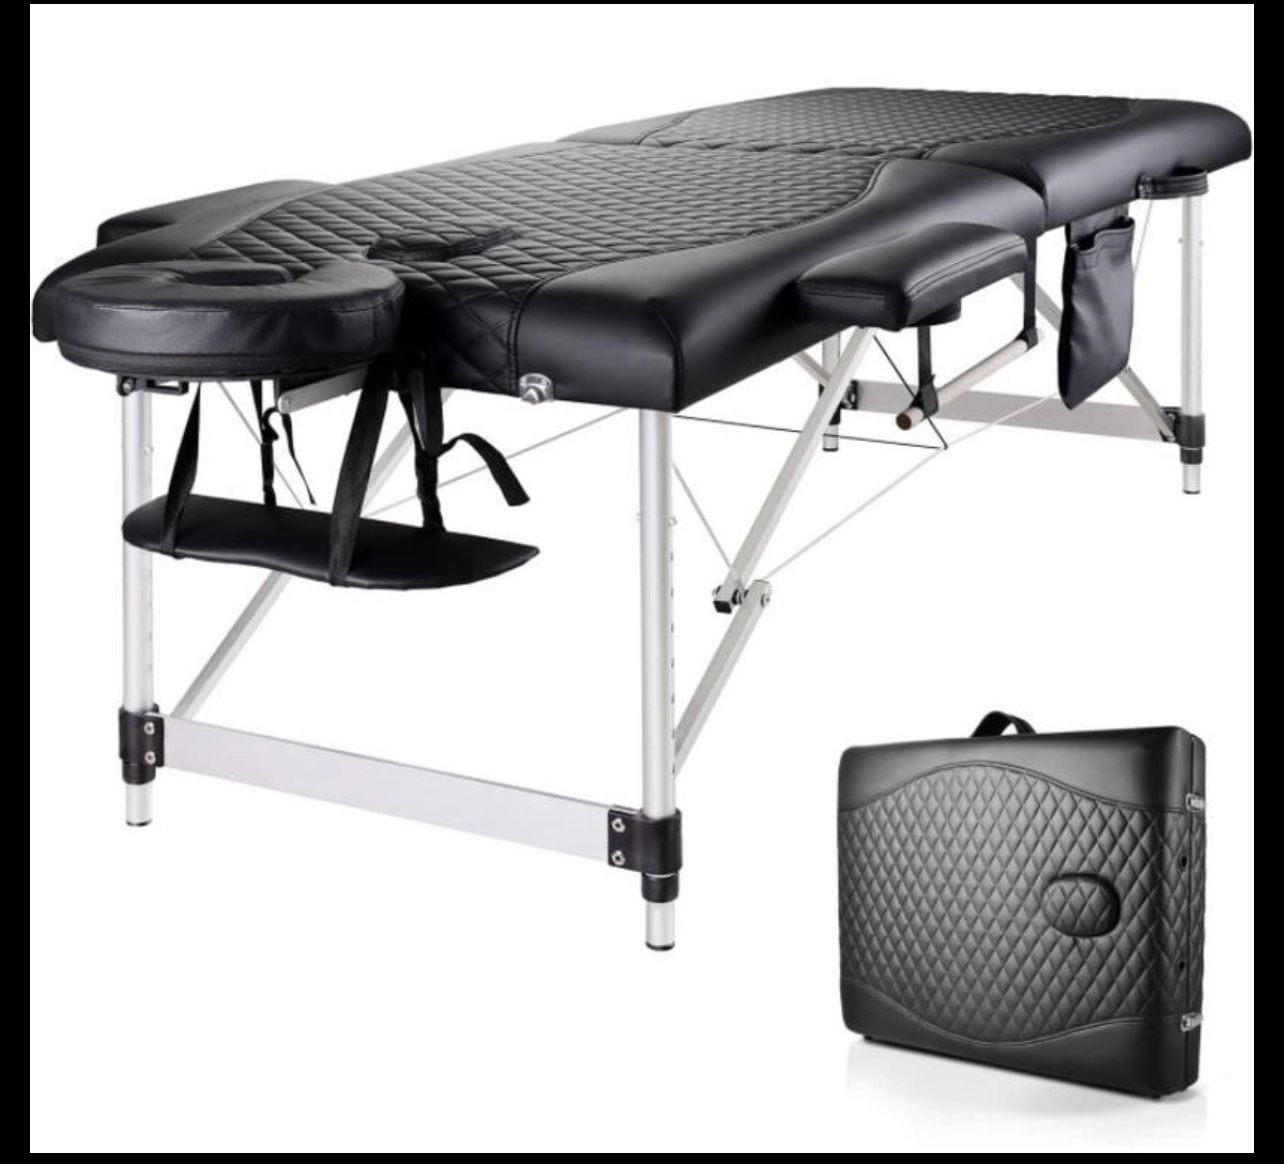 New In Box, New Massage Table Spa Bed, Professional Portable